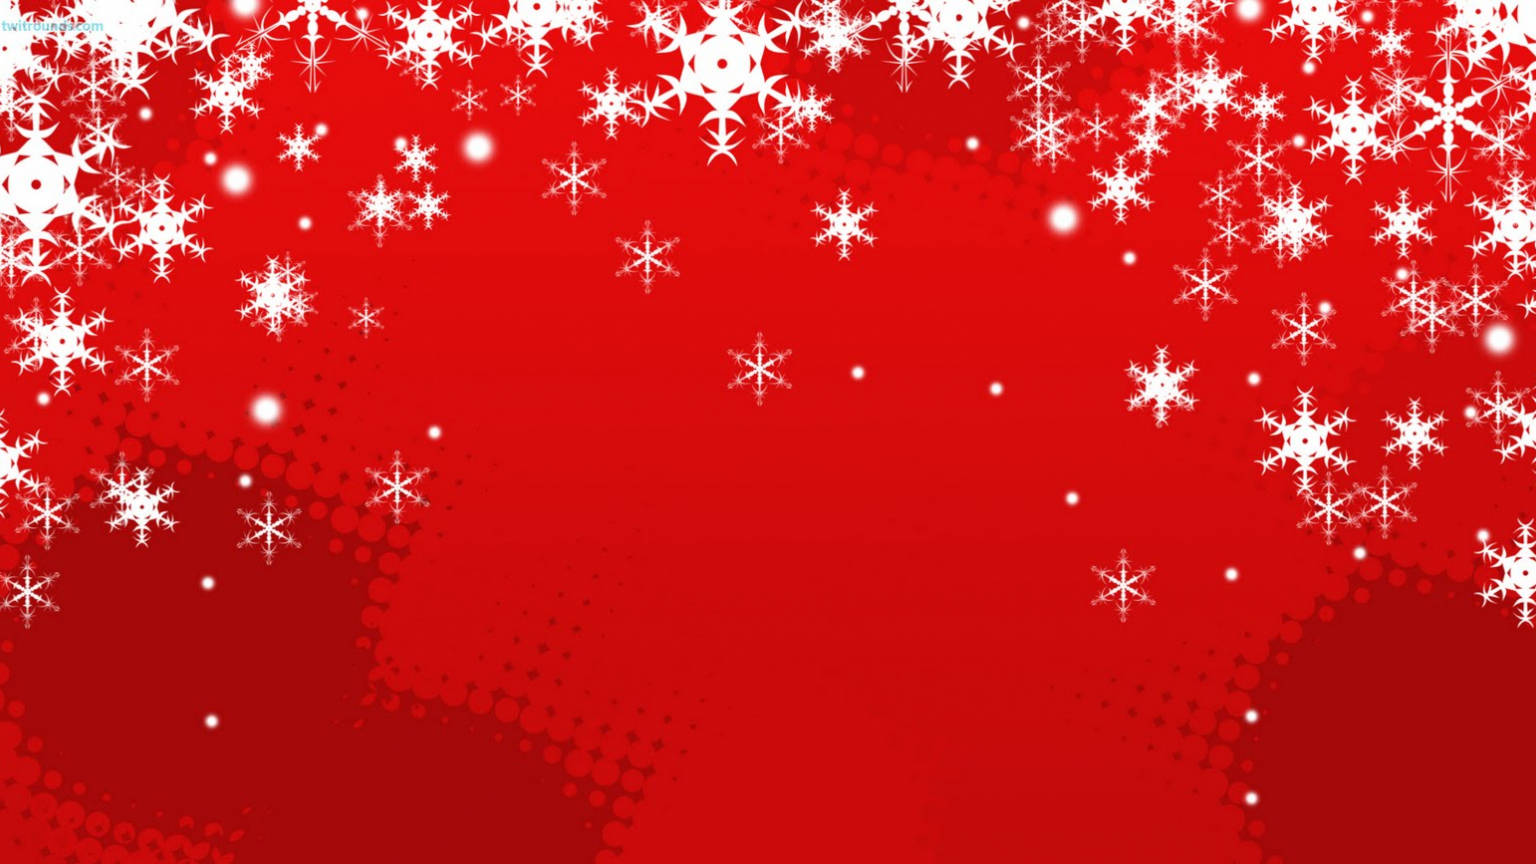 Sparkly Snowflakes Red Christmas Background